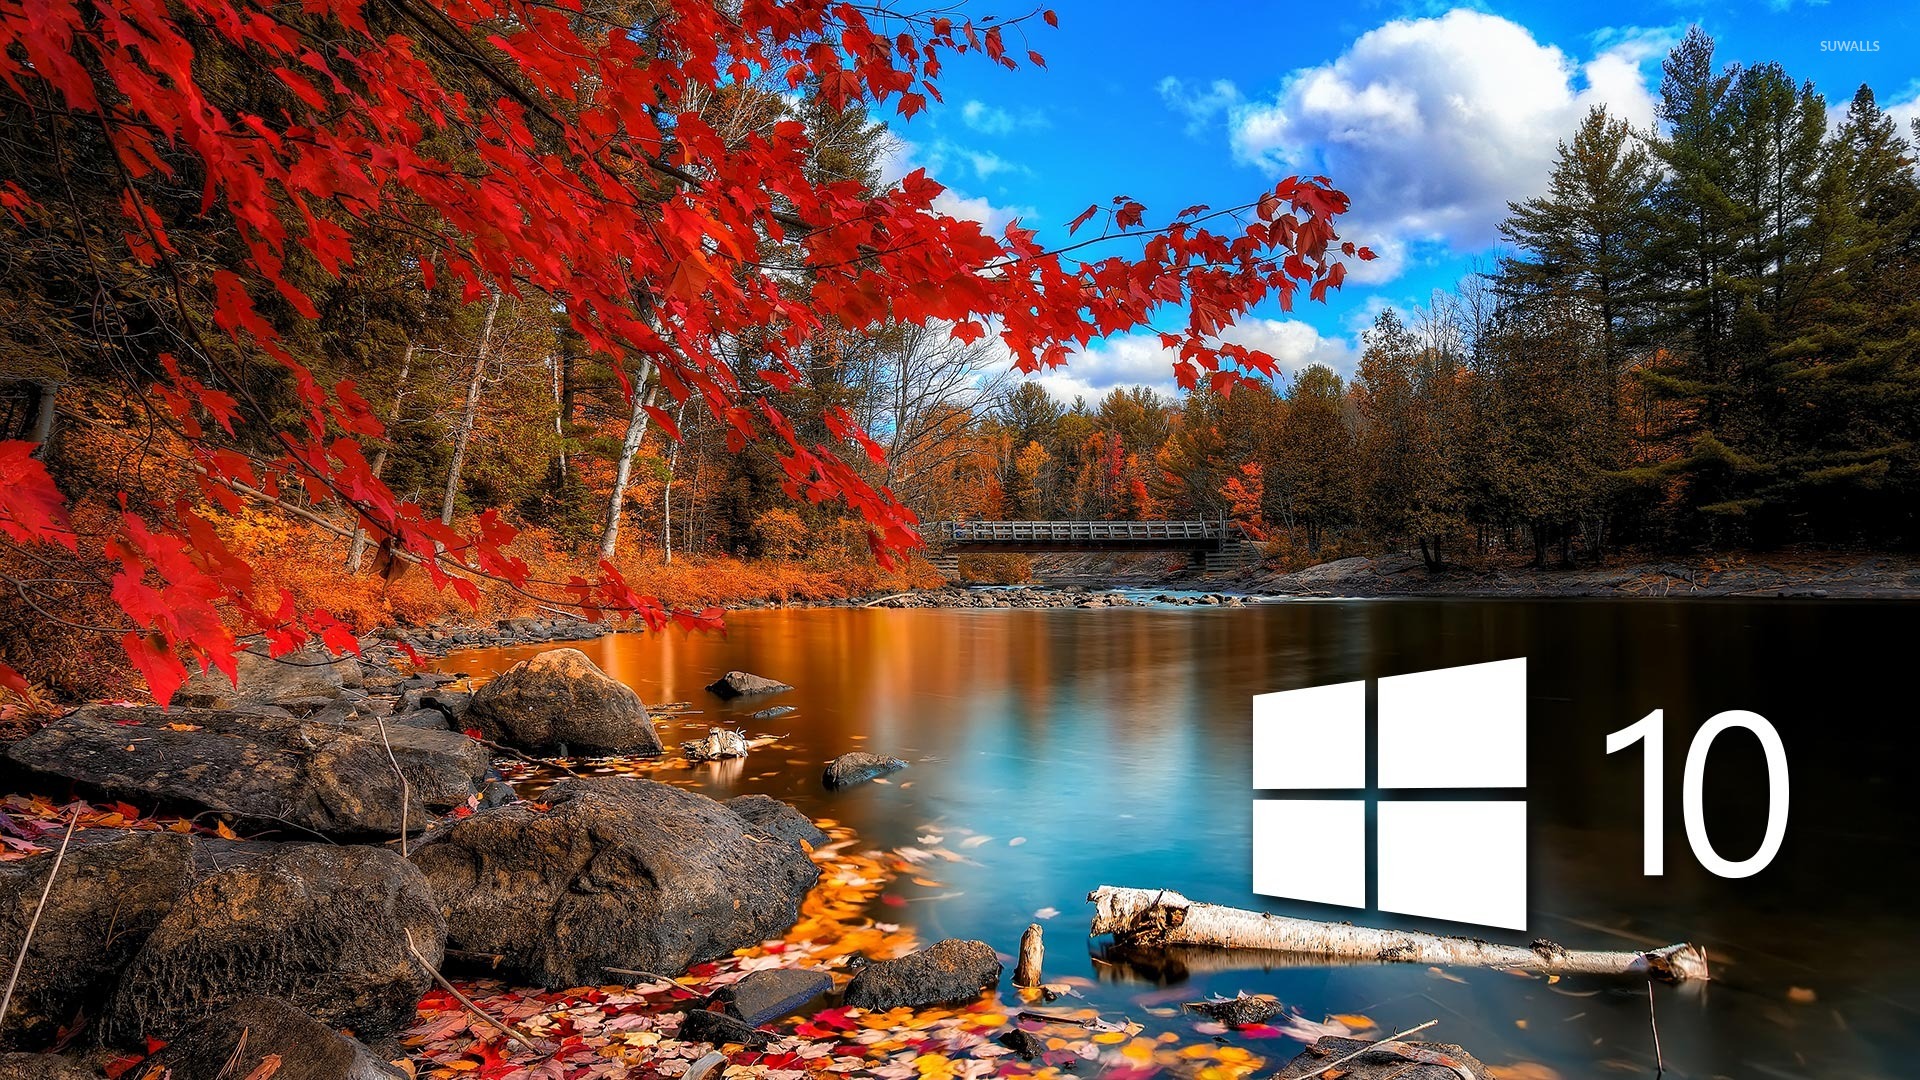 Windows 10 over the lake simple logo wallpaper - Computer wallpapers